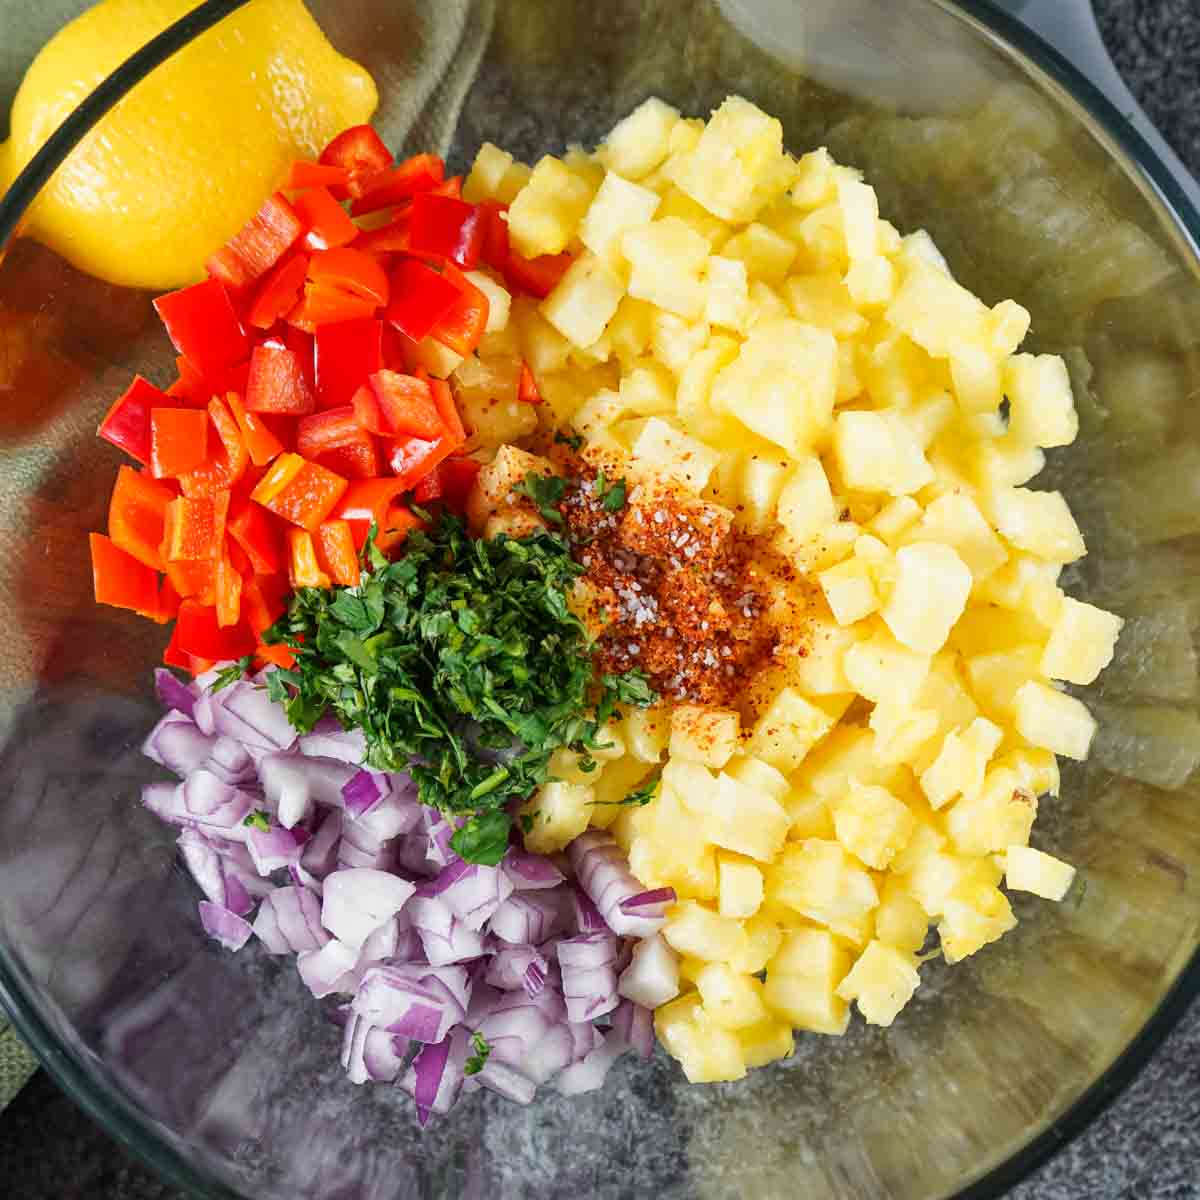 A bowl with chopped pineapple, red bell peppers, red onions, cilantro, and spices, with a lemon on the side.